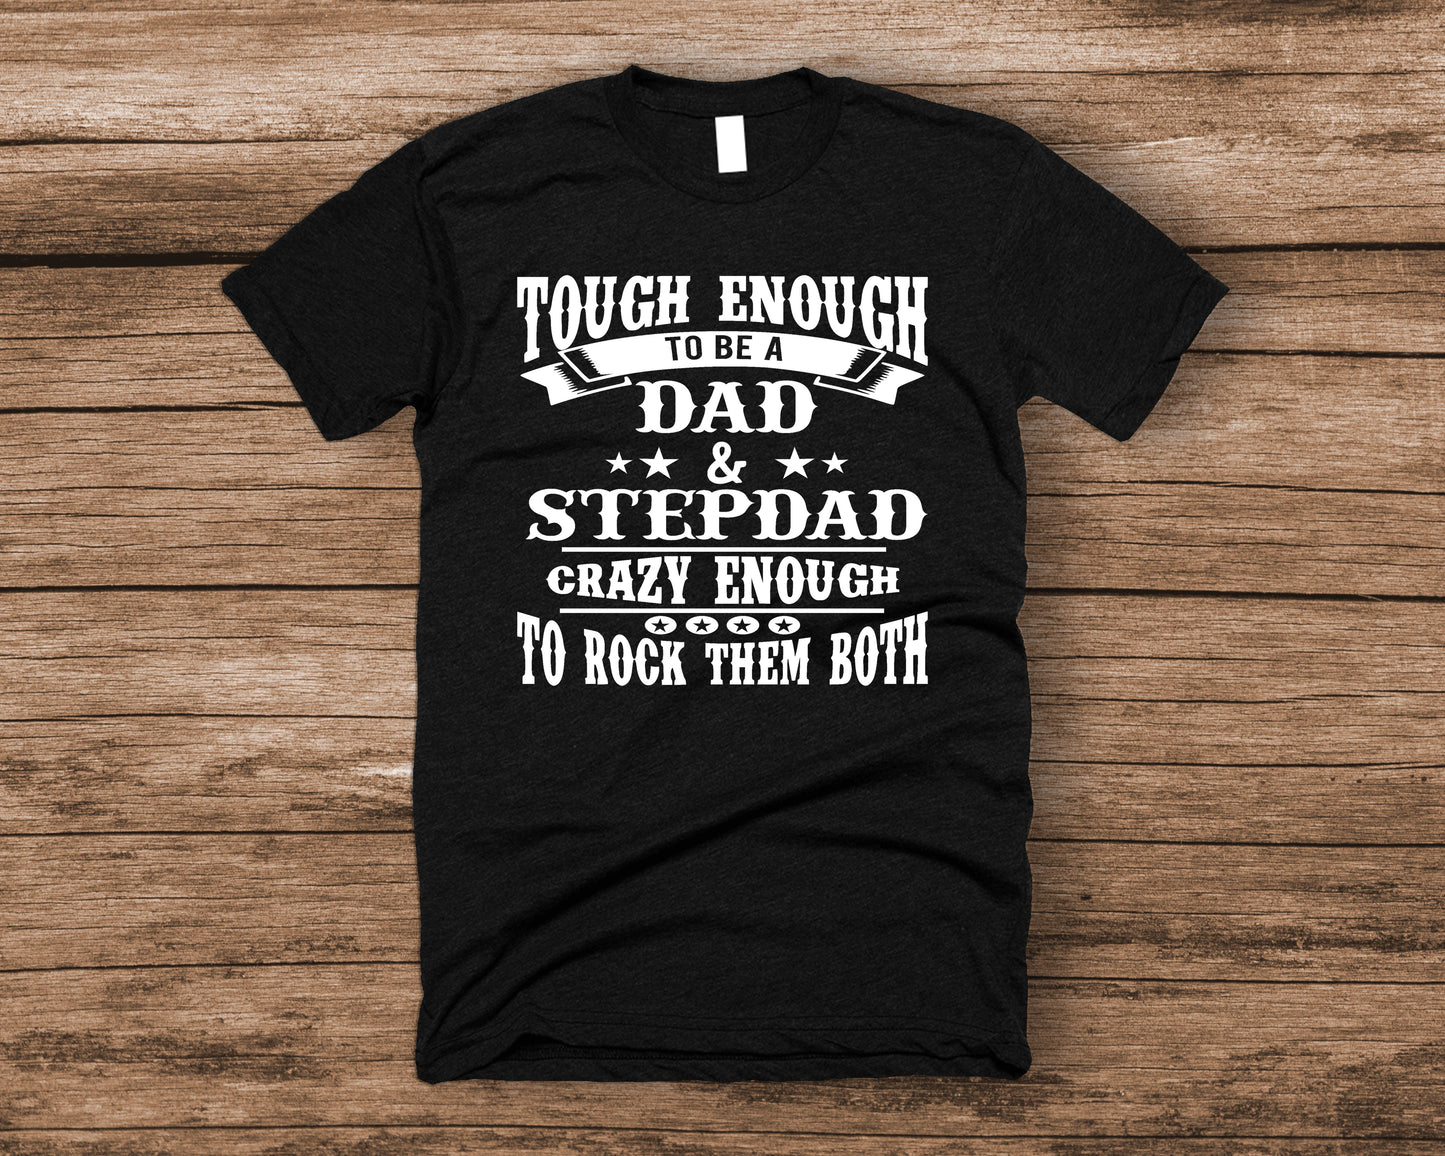 Tough enough to be a dad and stepdad